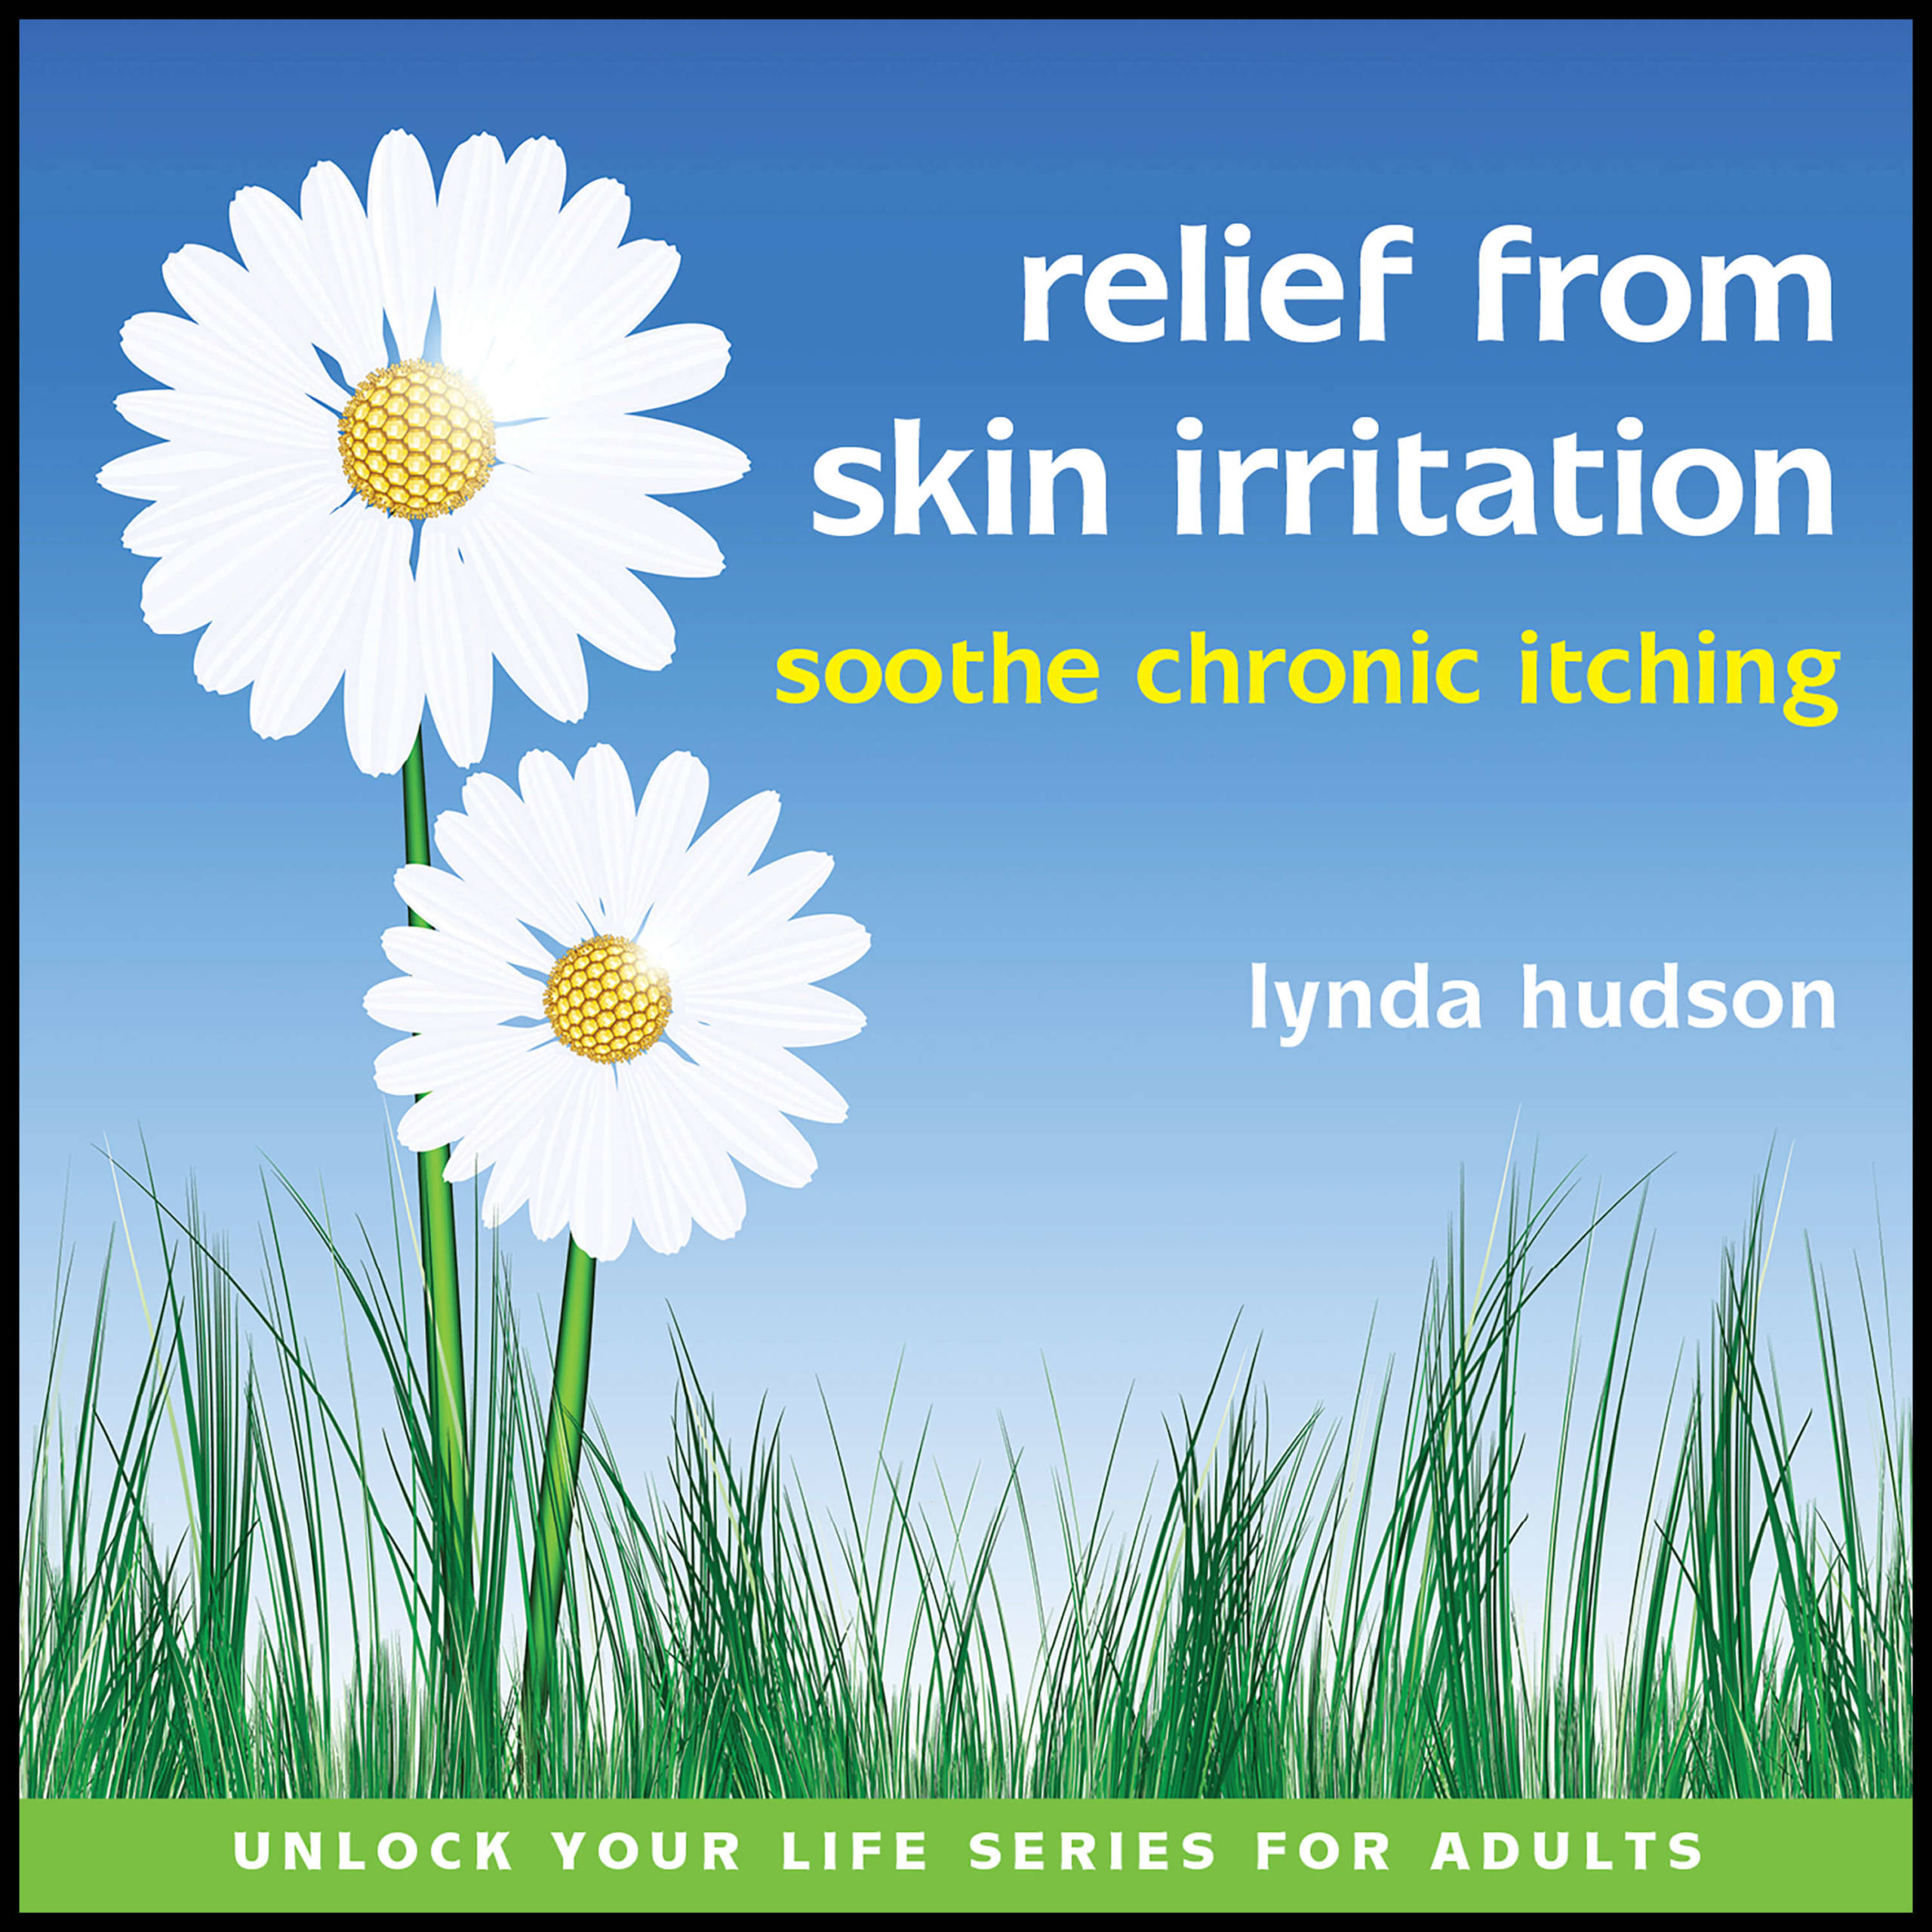 Relief from skin irritation